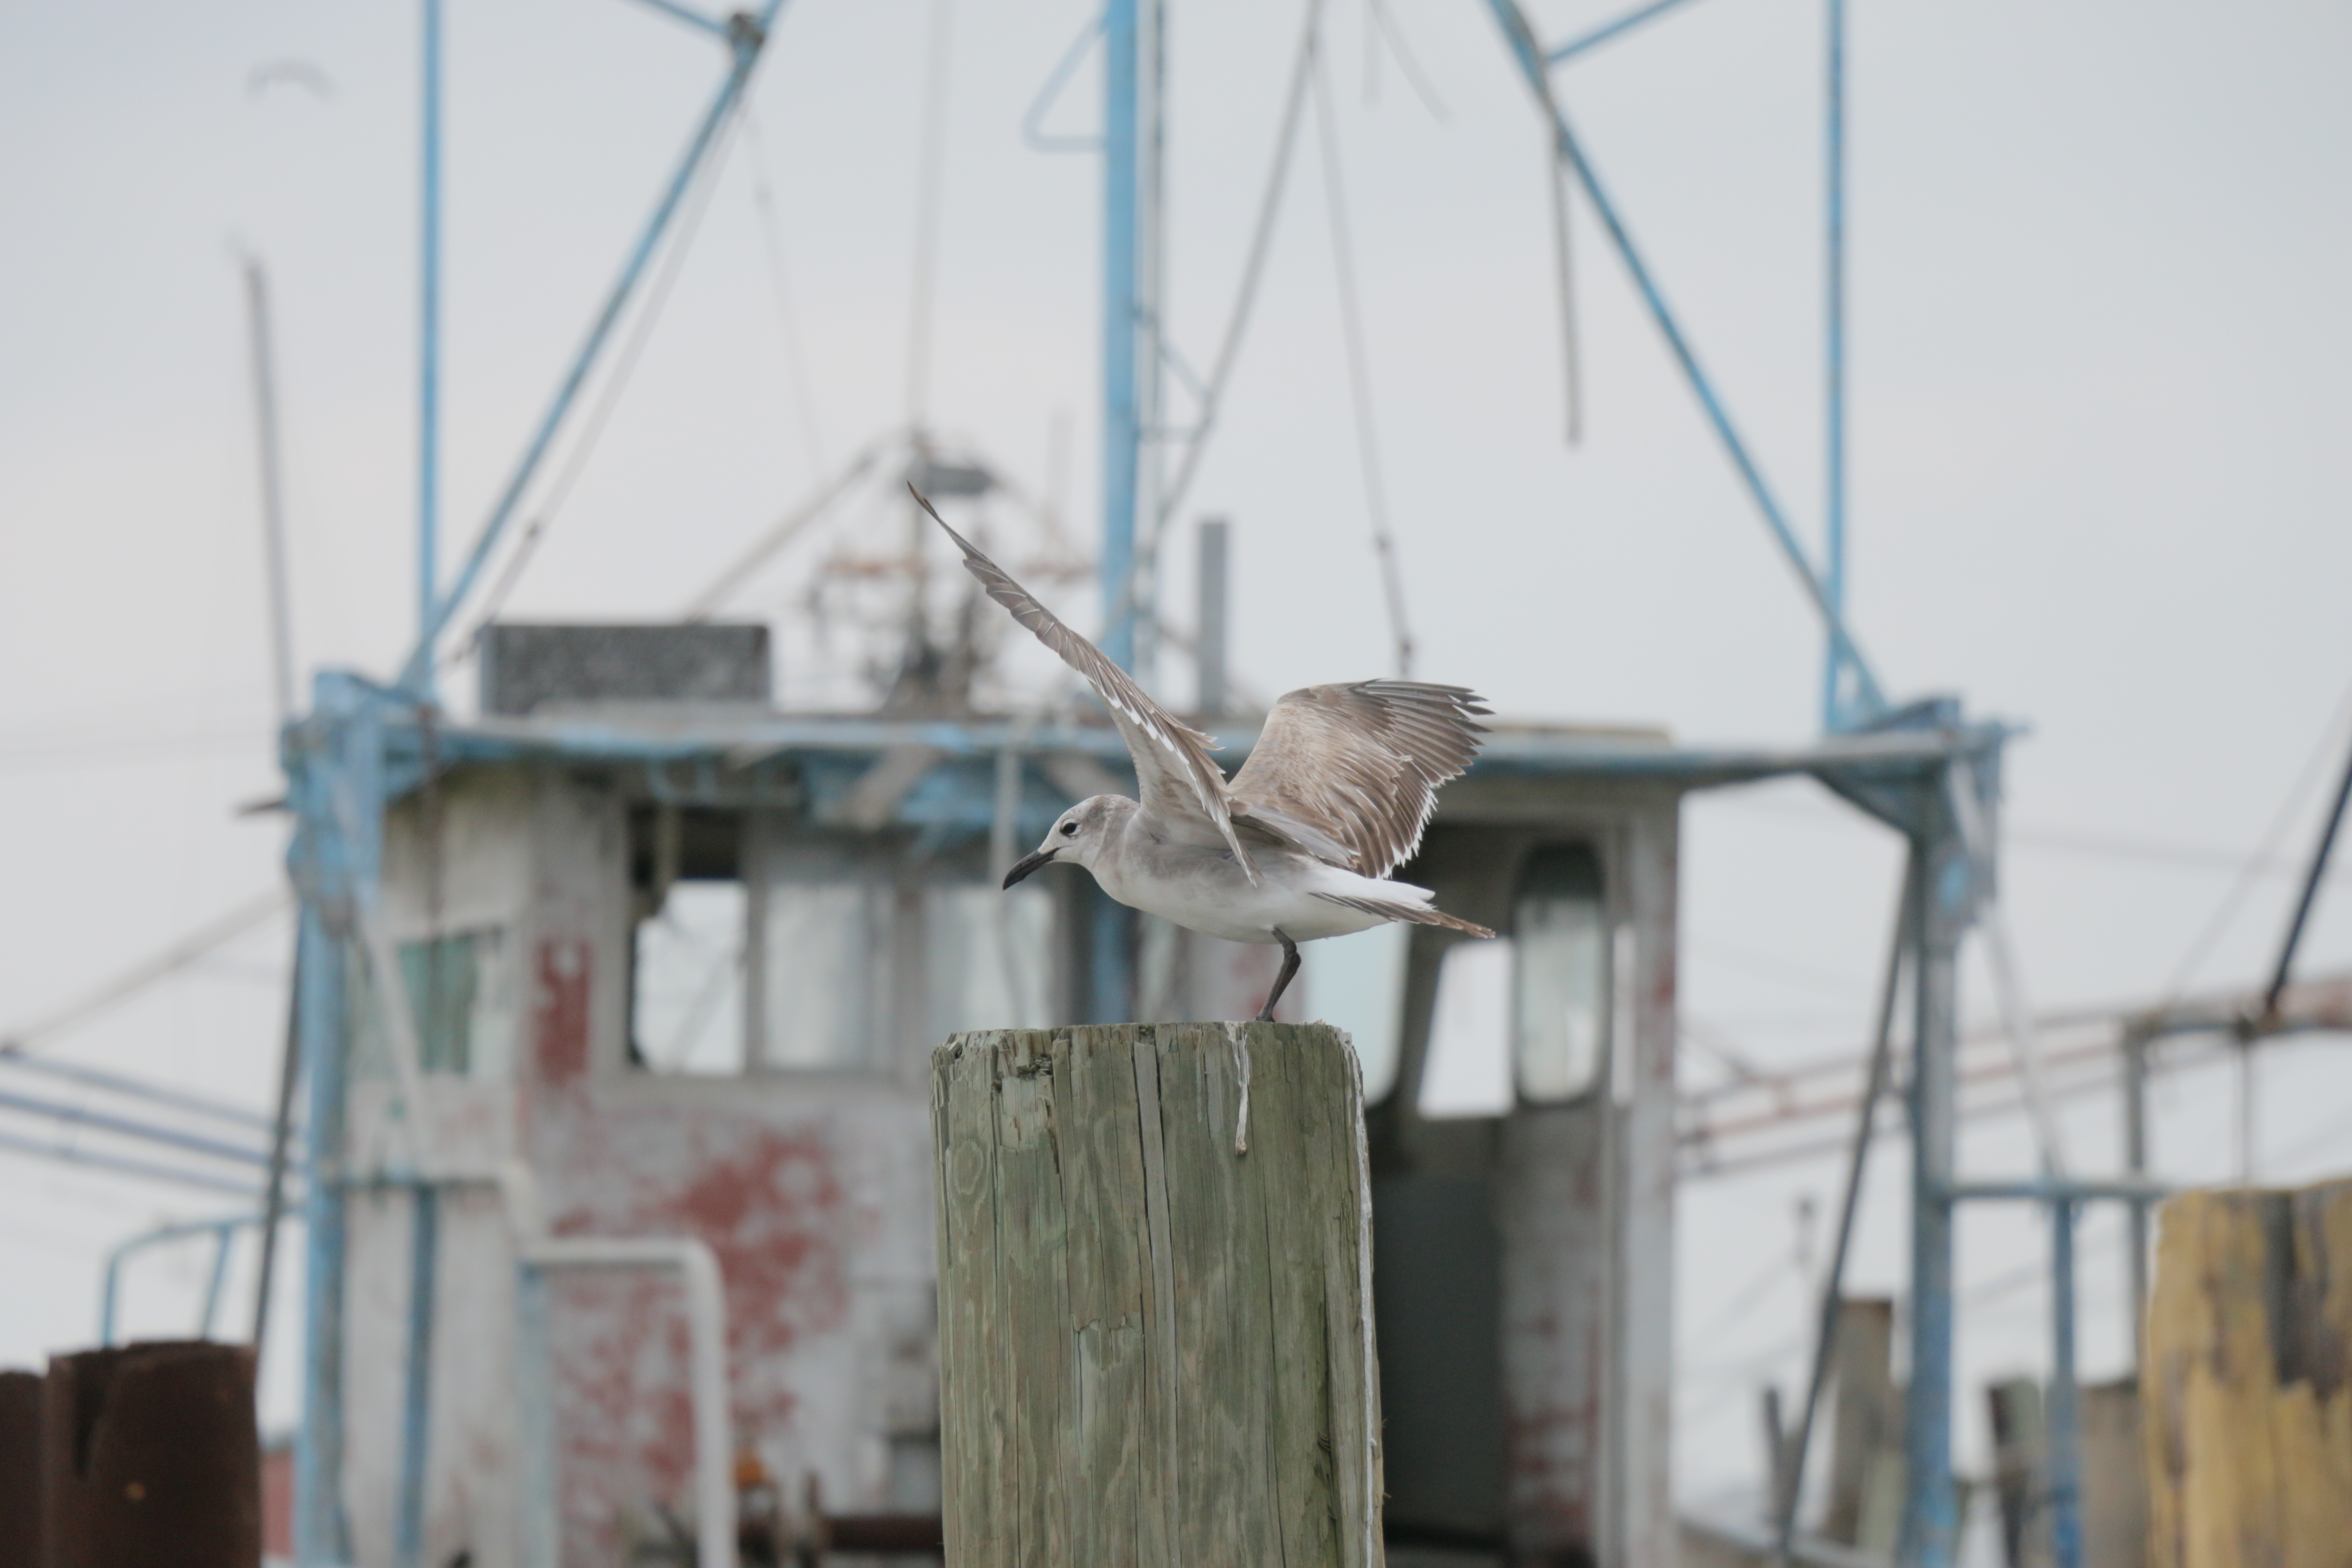 A seagull sits on the docks of Grand Isle.  Fisheries and wildlife appear to be recovering from the effects of the BP oil spill.